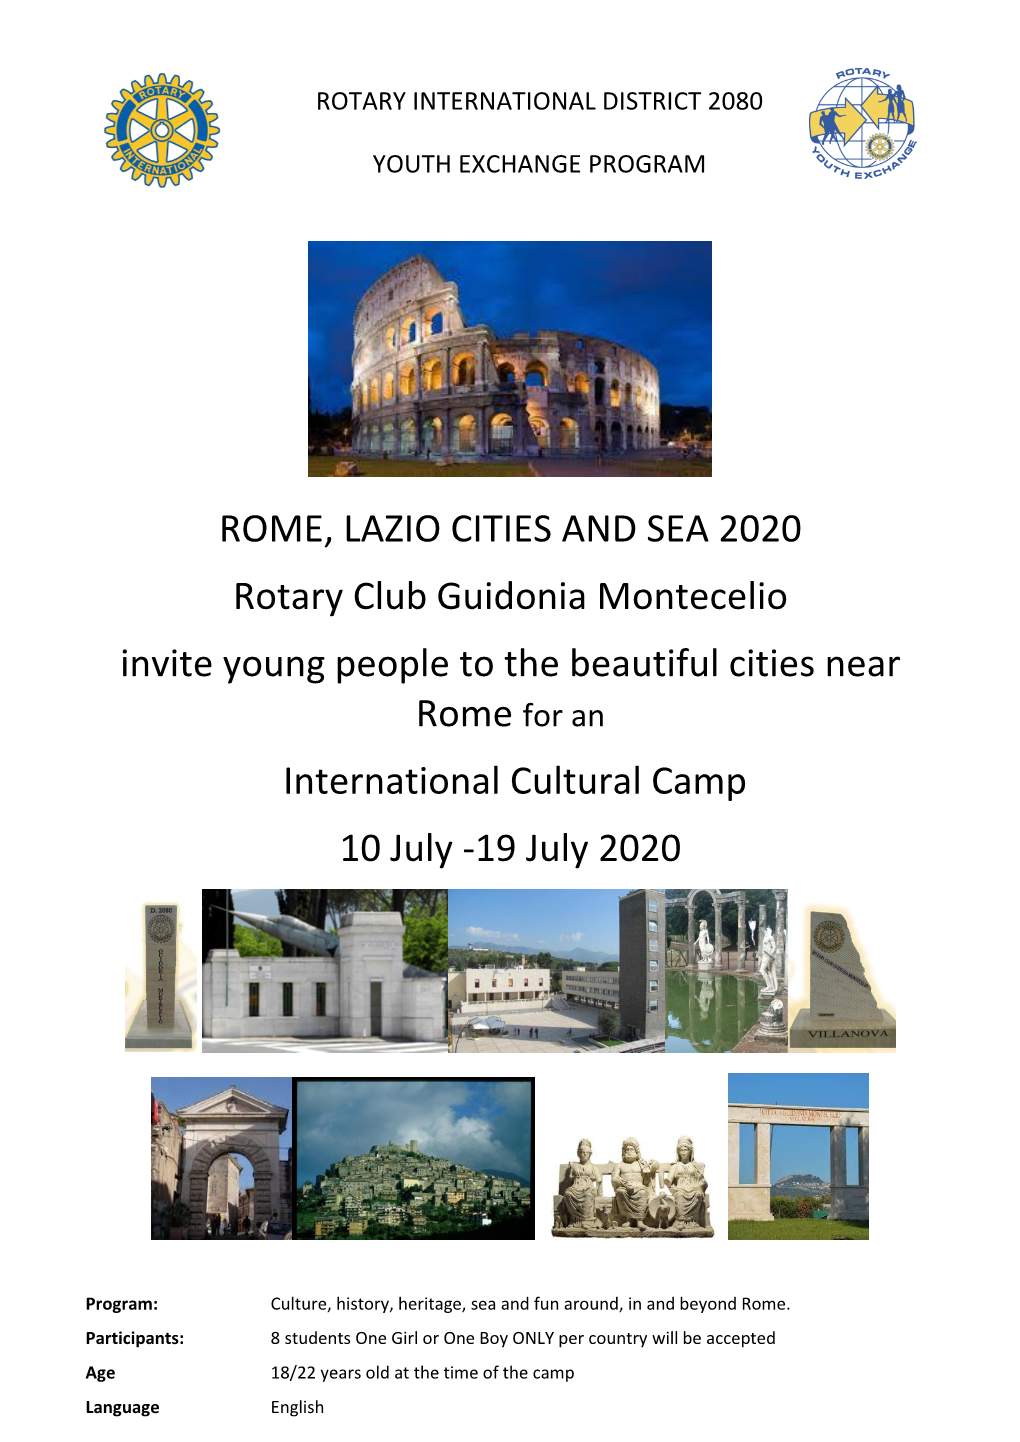 ROME, LAZIO CITIES and SEA 2020 Rotary Club Guidonia Montecelio Invite Young People to the Beautiful Cities Near Rome for an International Cultural Camp